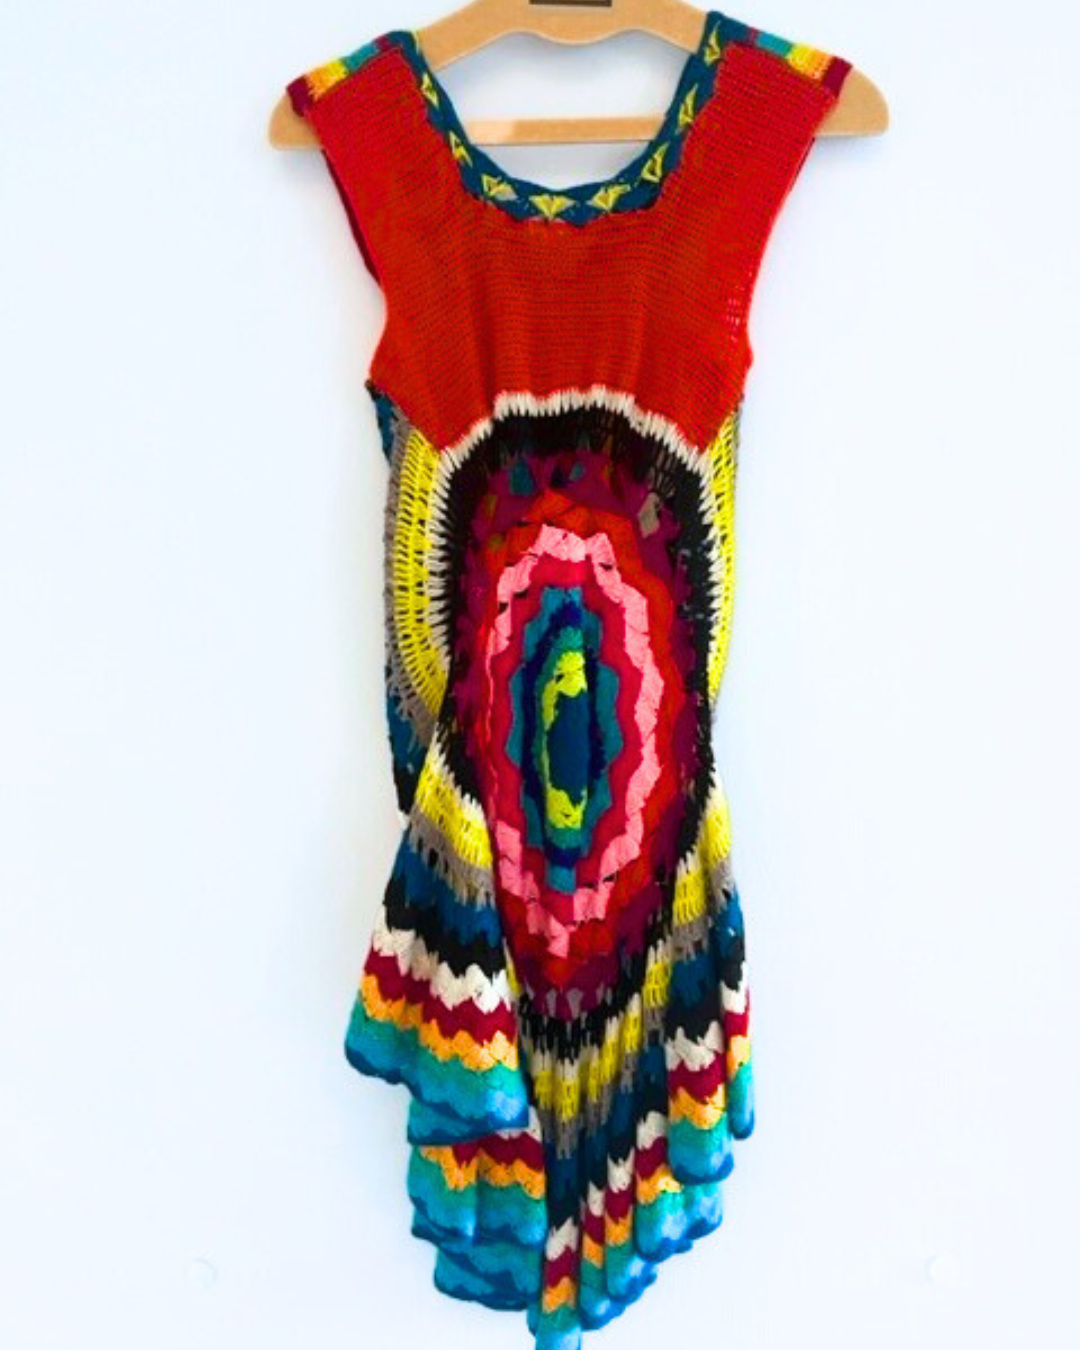 GENUINE Vintage PSYCHEDELIC KNIT dress 70's  - XS/SMALL